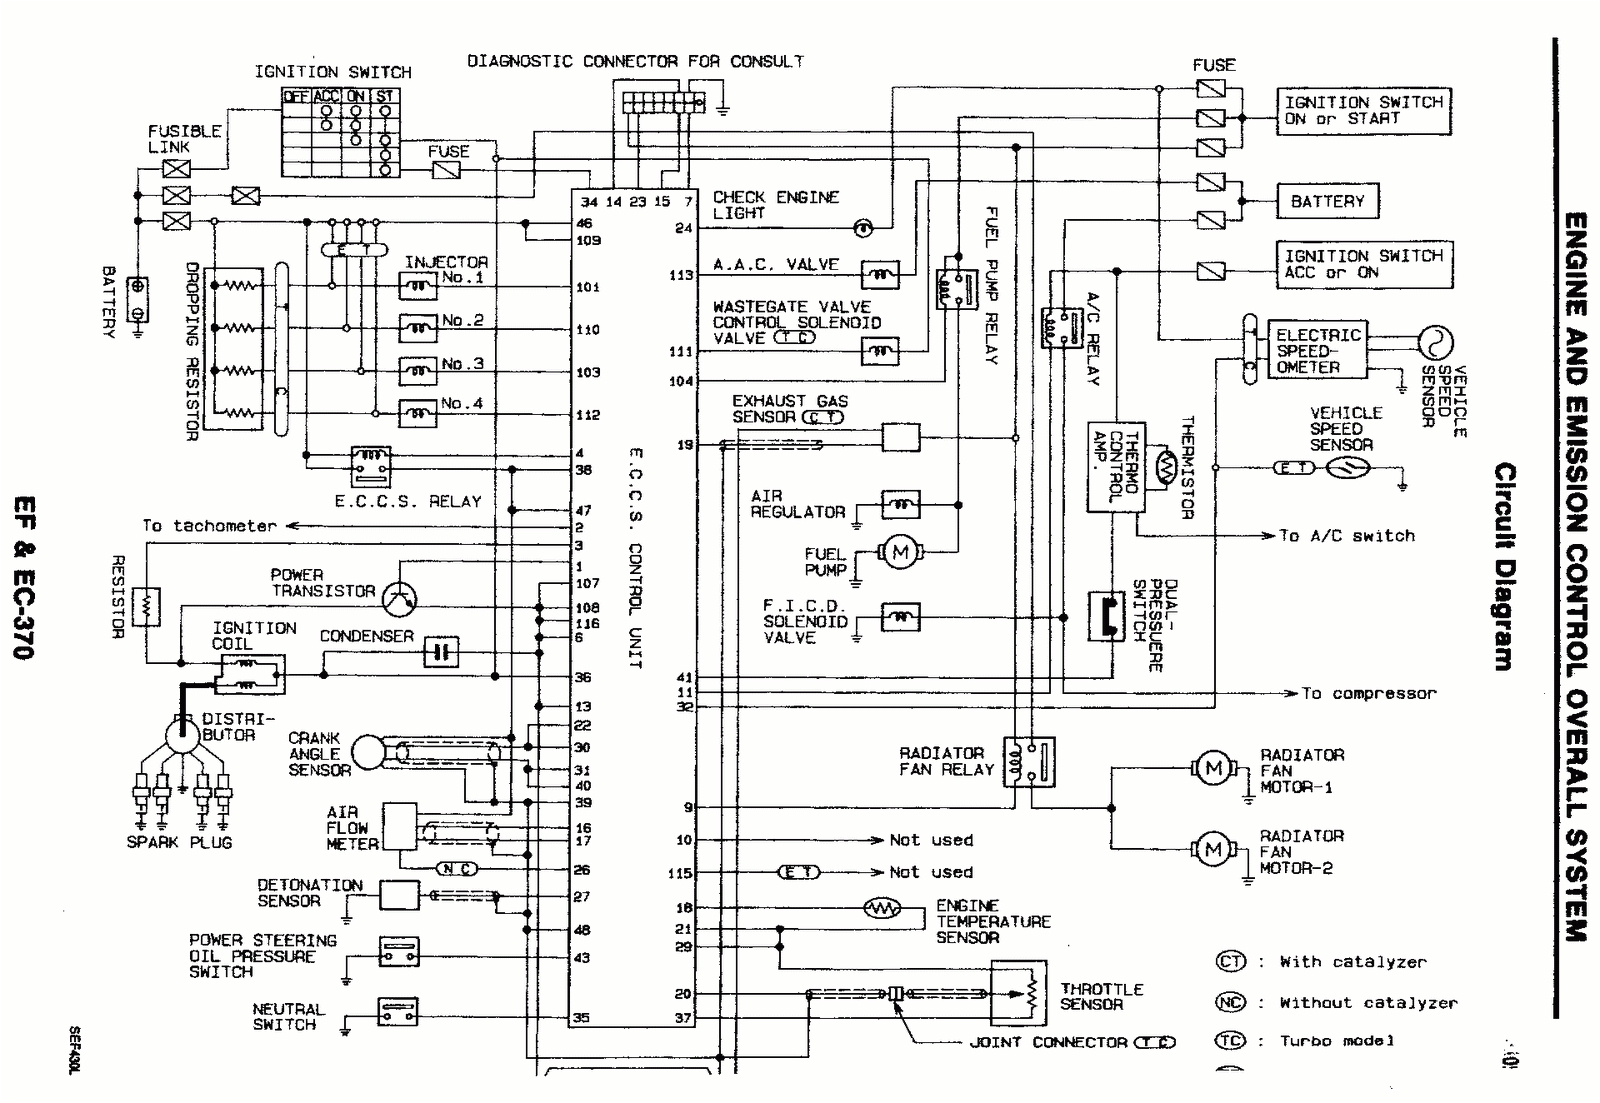 wiring diagram for 1997 audi a6 wiring diagram world 1997 camaro radio wiring diagram 1997 audi wiring diagram